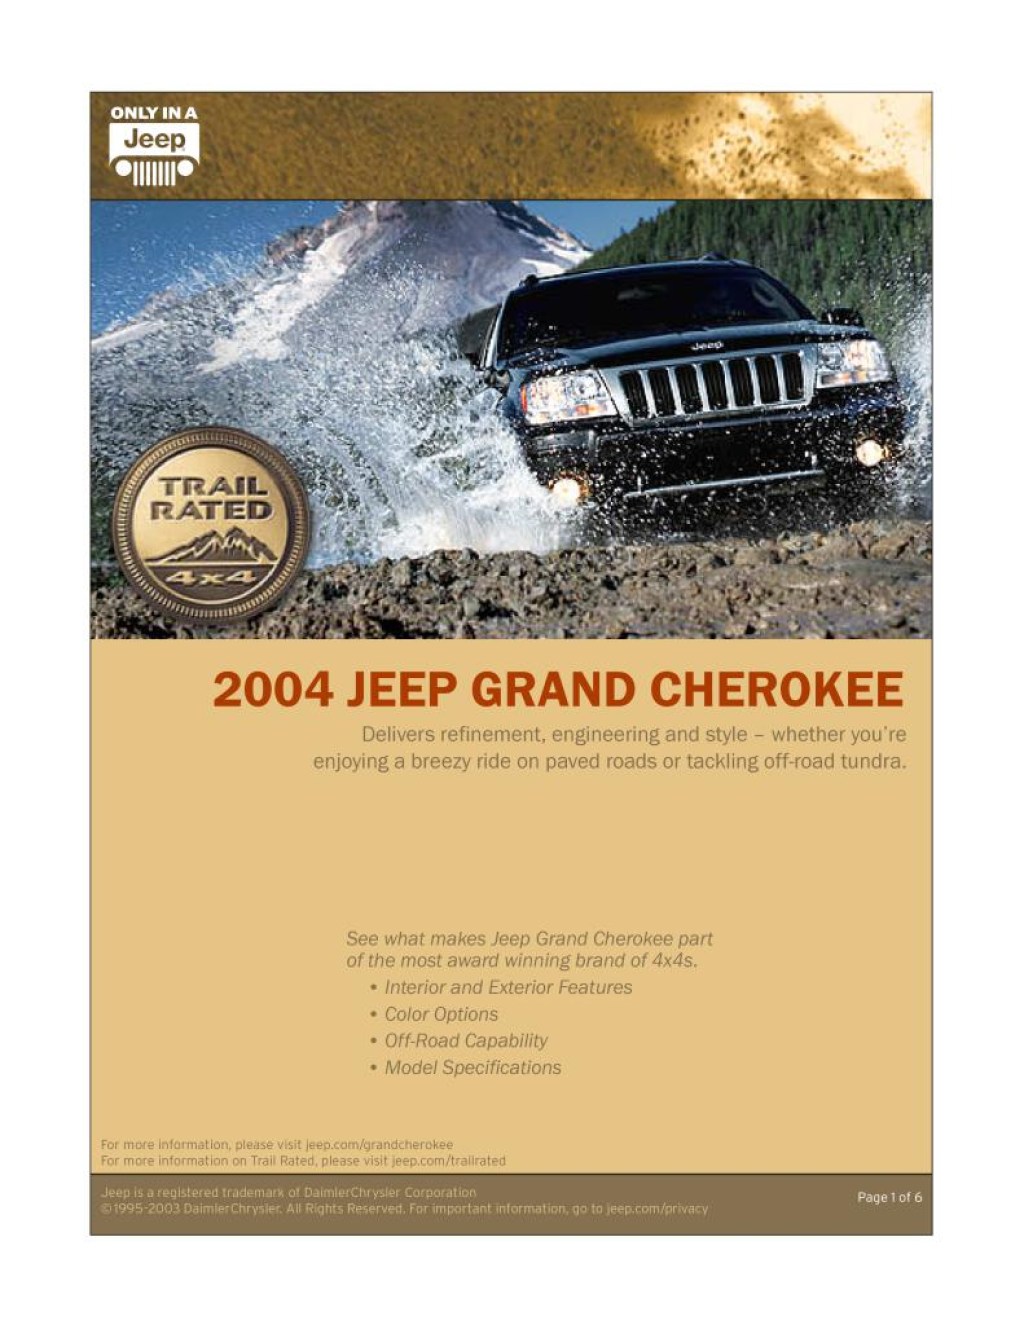 Picture of: jeep grand cherokee brochure